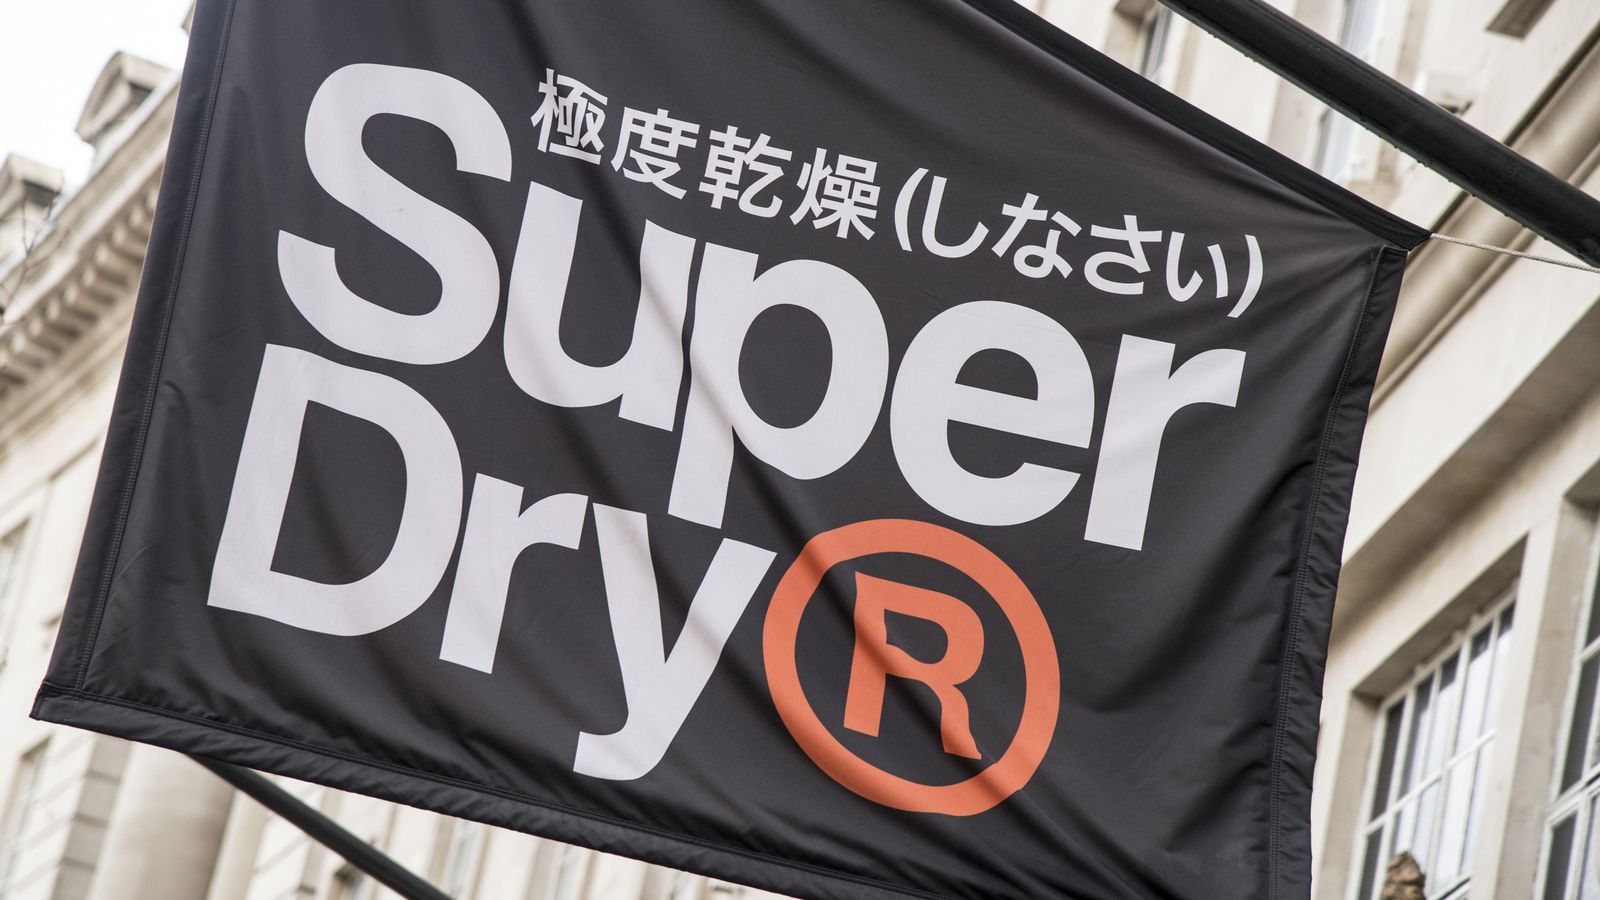 Superdry shares double in a single day as founder enters talks to take the company private 